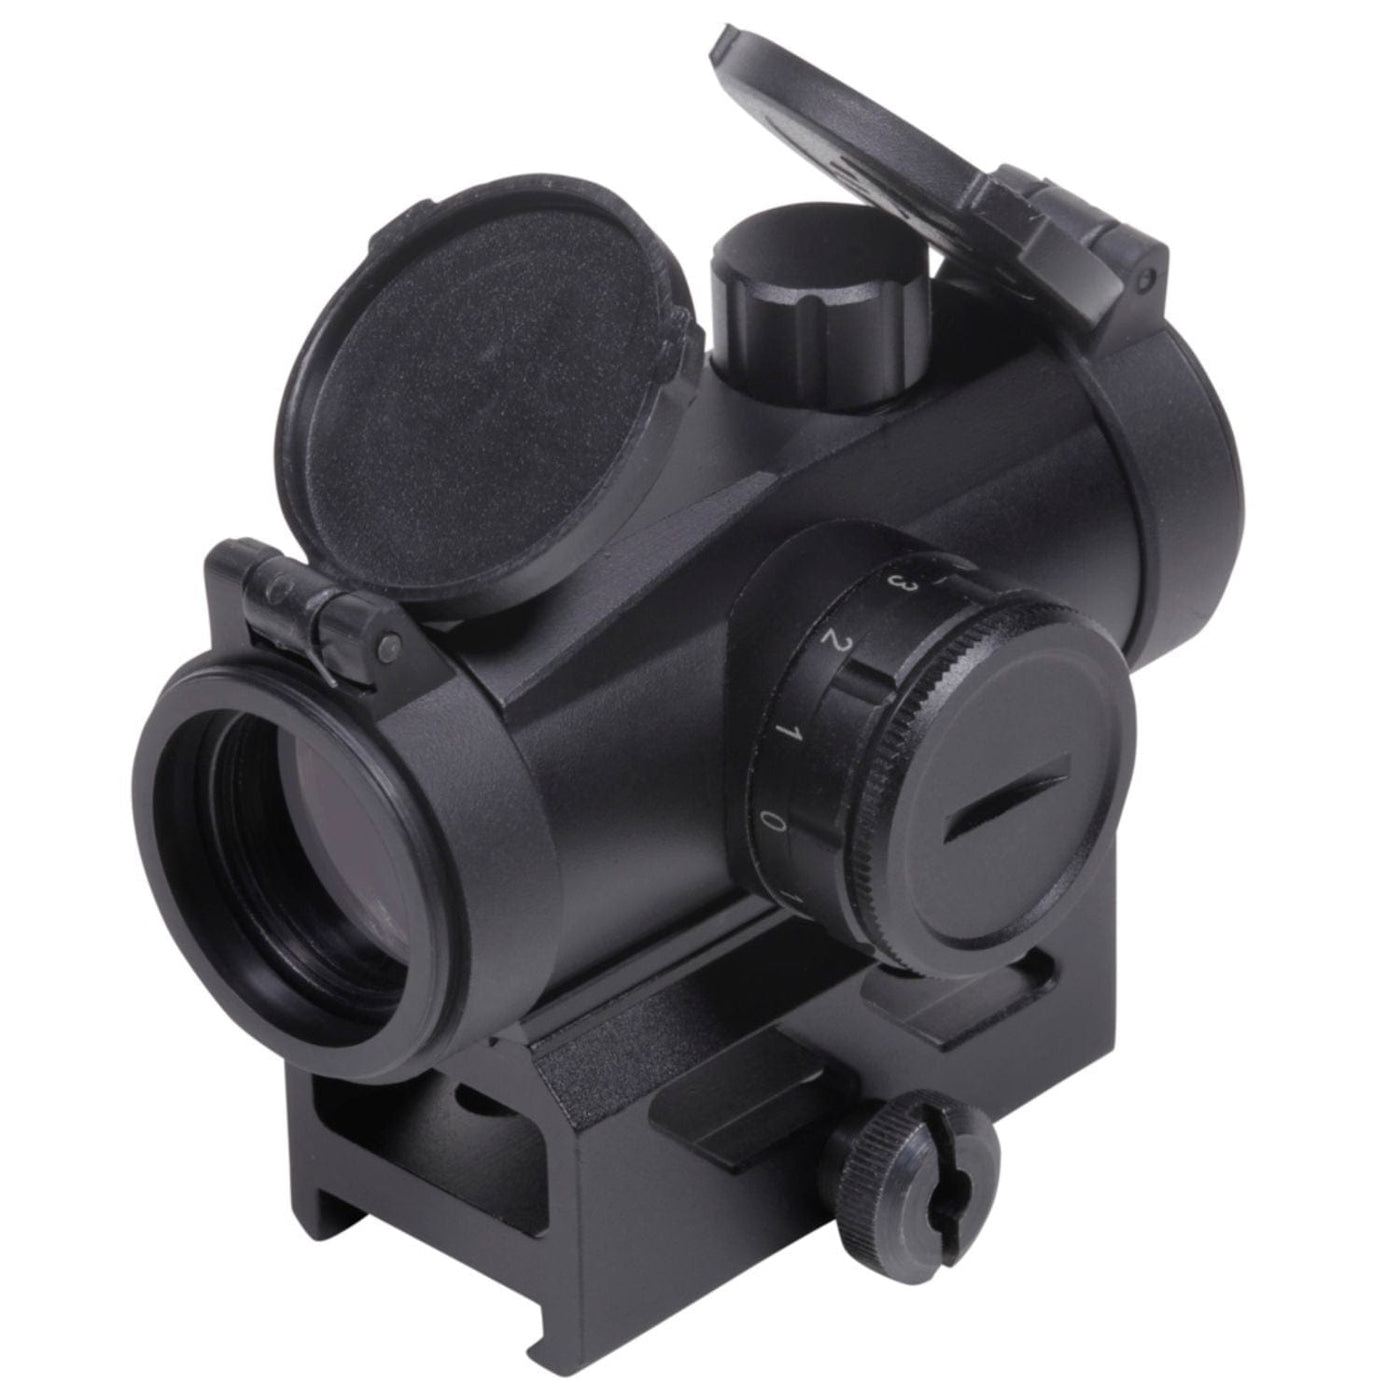 Firefield Firefield Impulse 1x22 Compact Red Dot Sight Optics And Sights